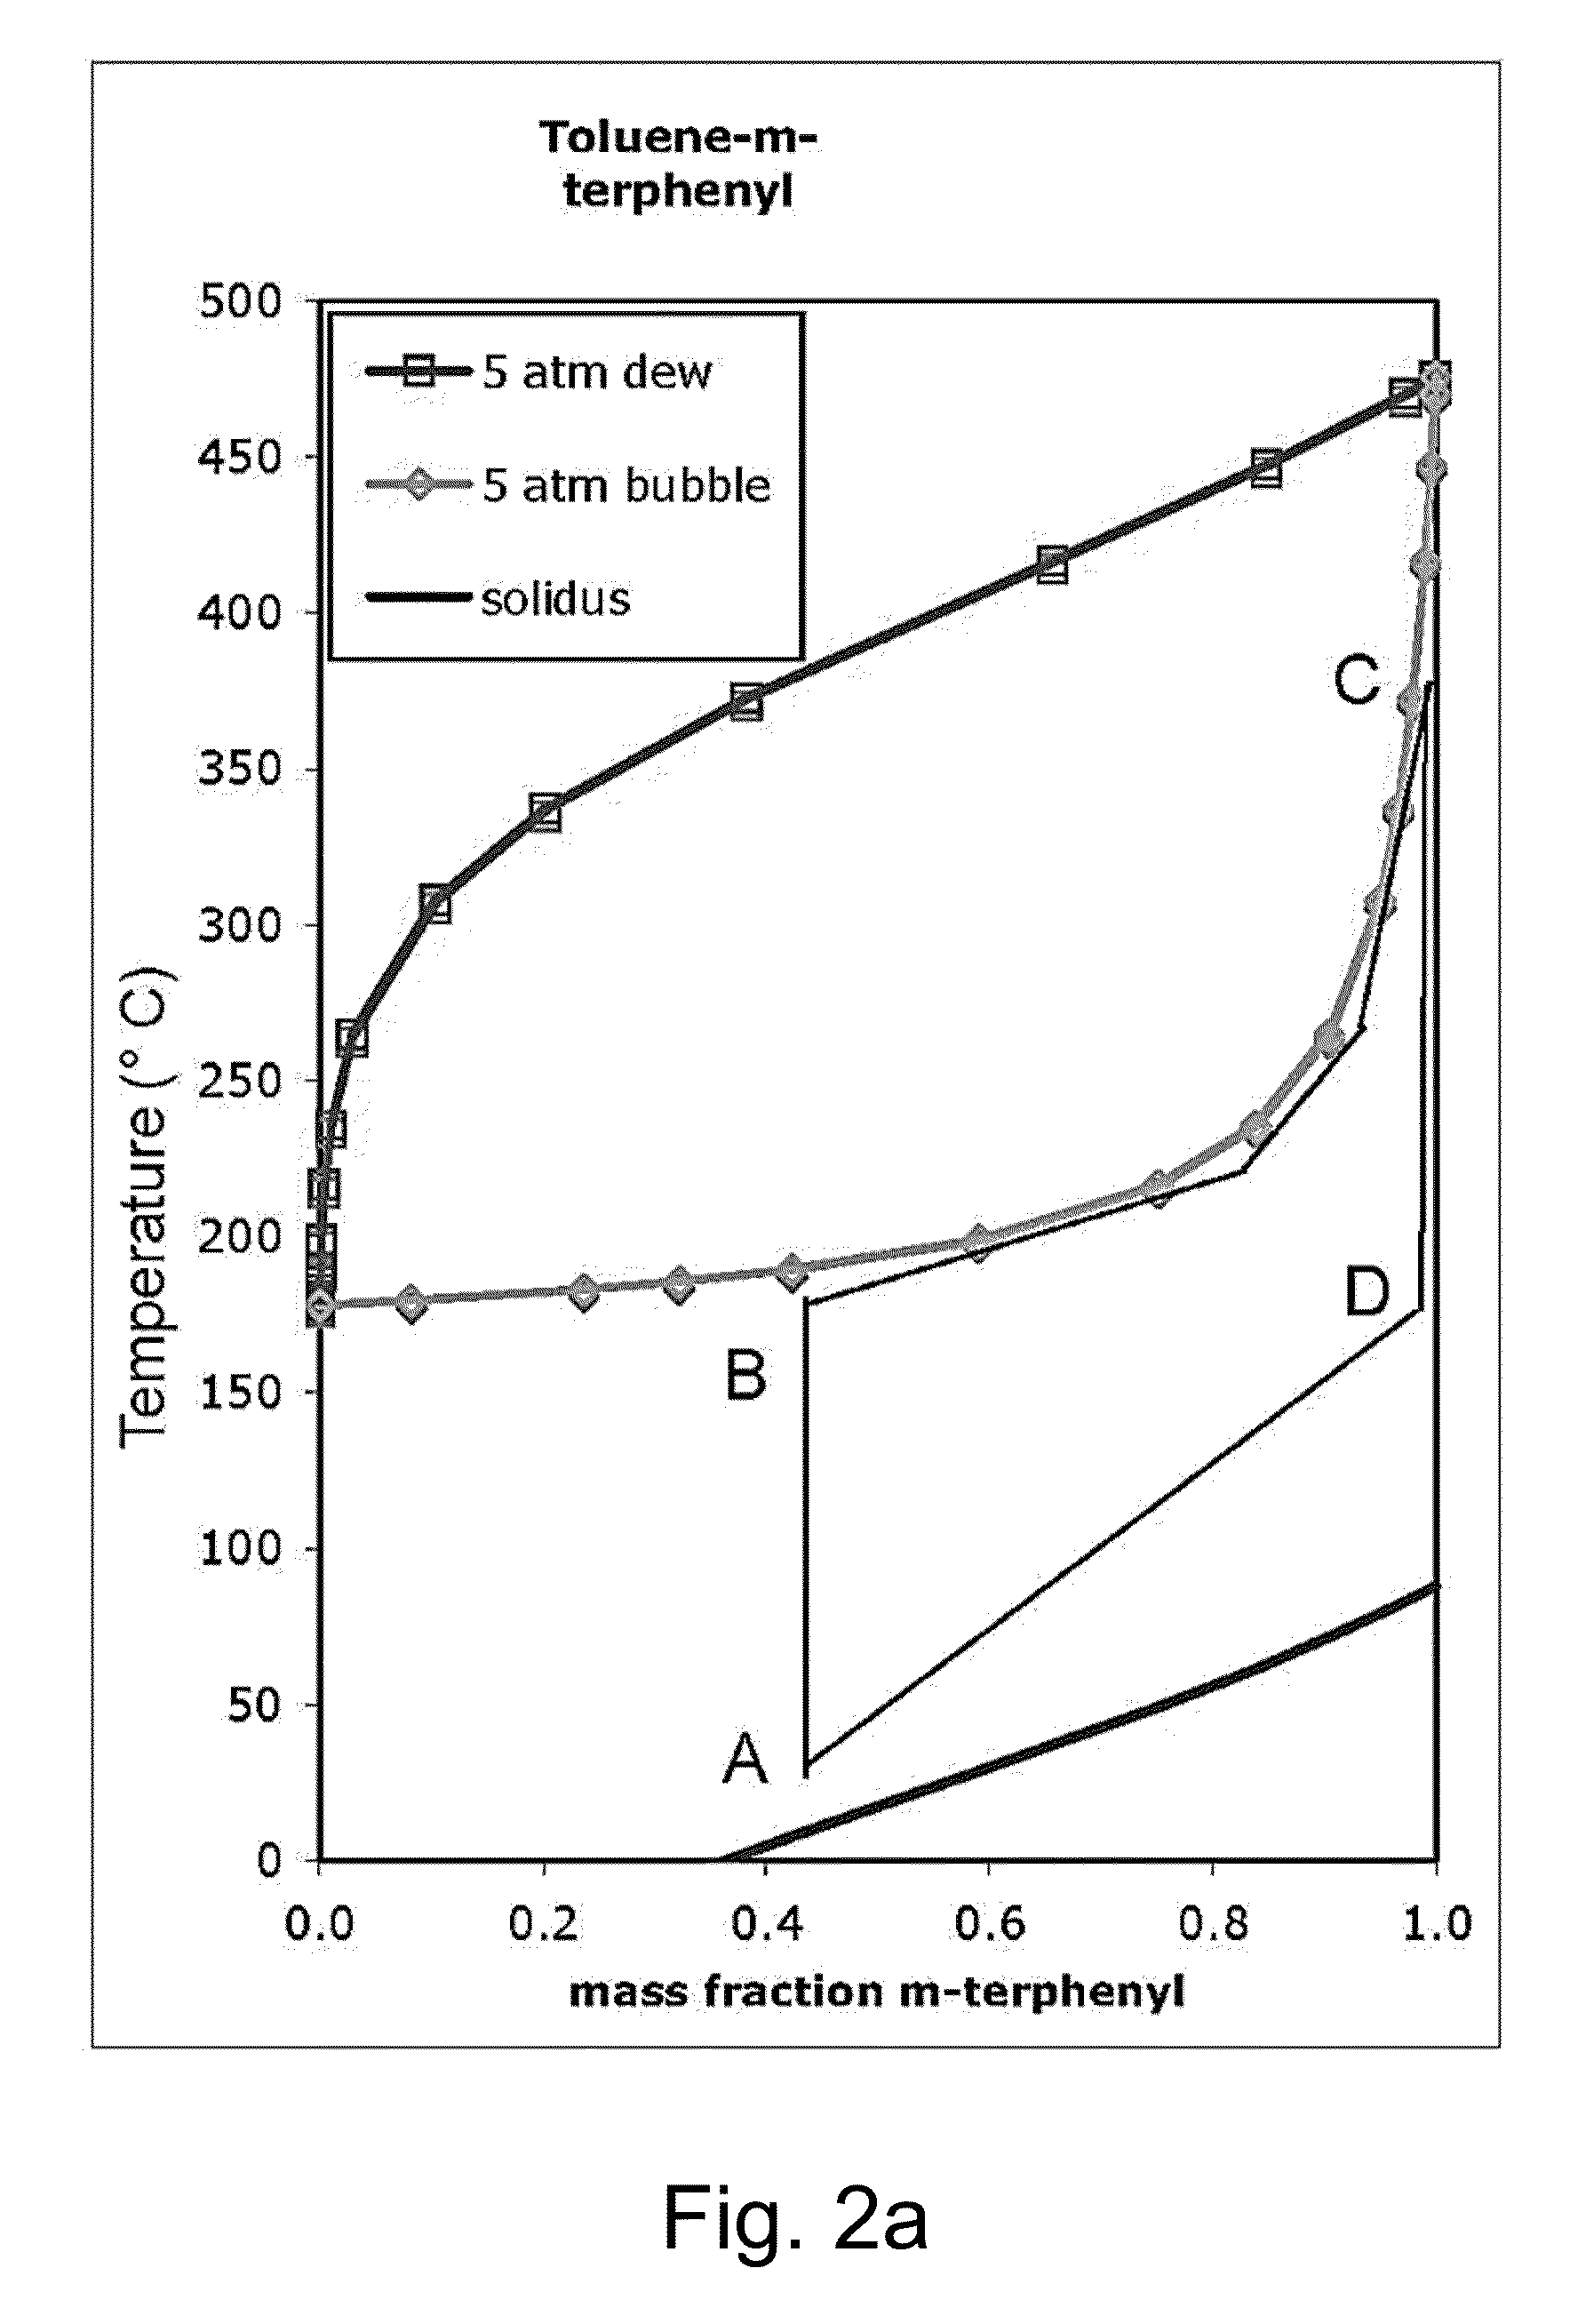 Extended-range heat transfer fluid using variable composition